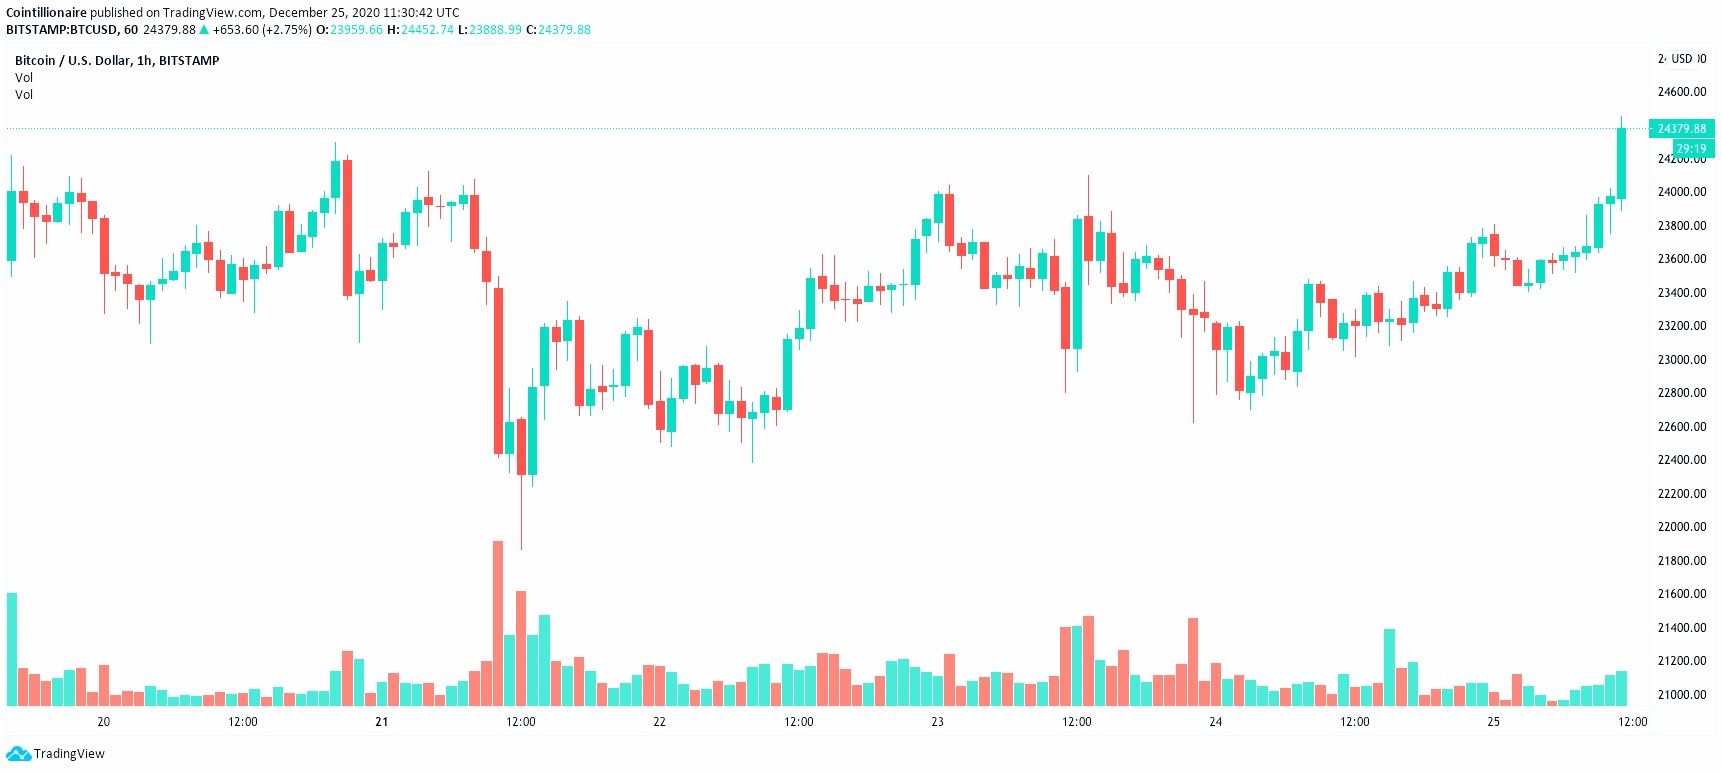 BTC/USD 1-hour candle chart (Bitstamp). Source: Tradingview